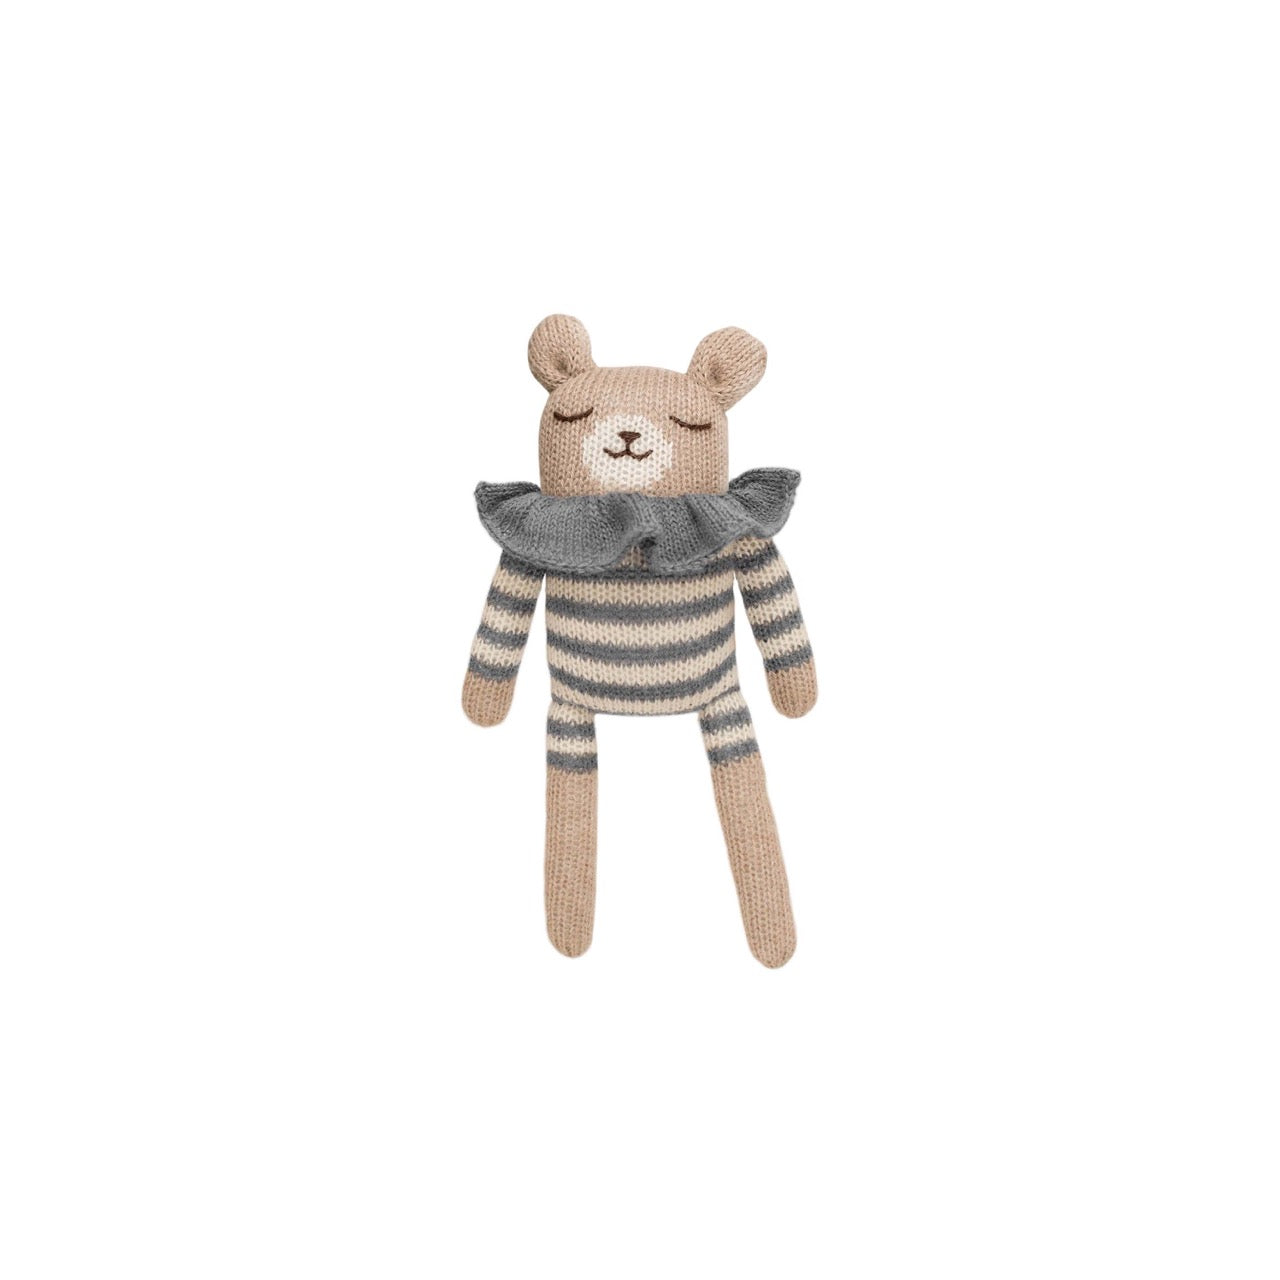 MAIN SAUVAGE - Teddy knit toy | slate striped romper